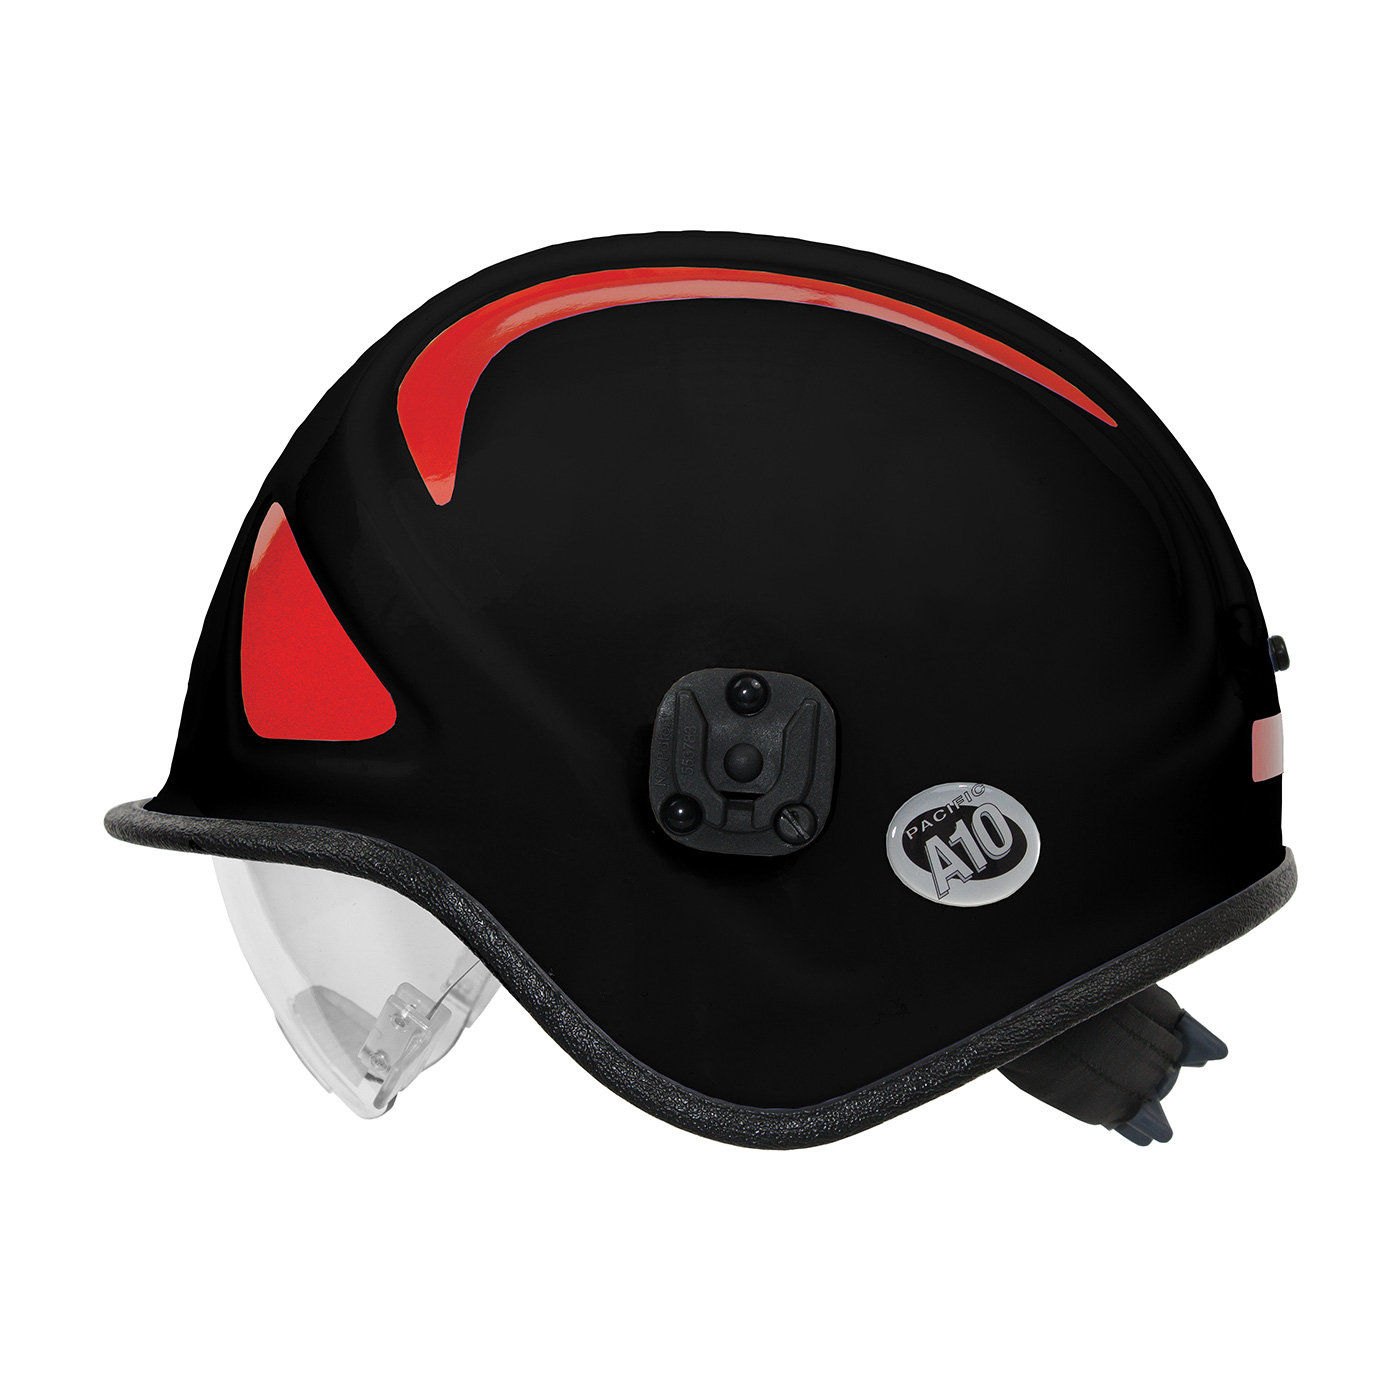 A10 Ambulance & Paramedic Rescue Helmet w/ Retractable Eye Protector from Pacific Helmet